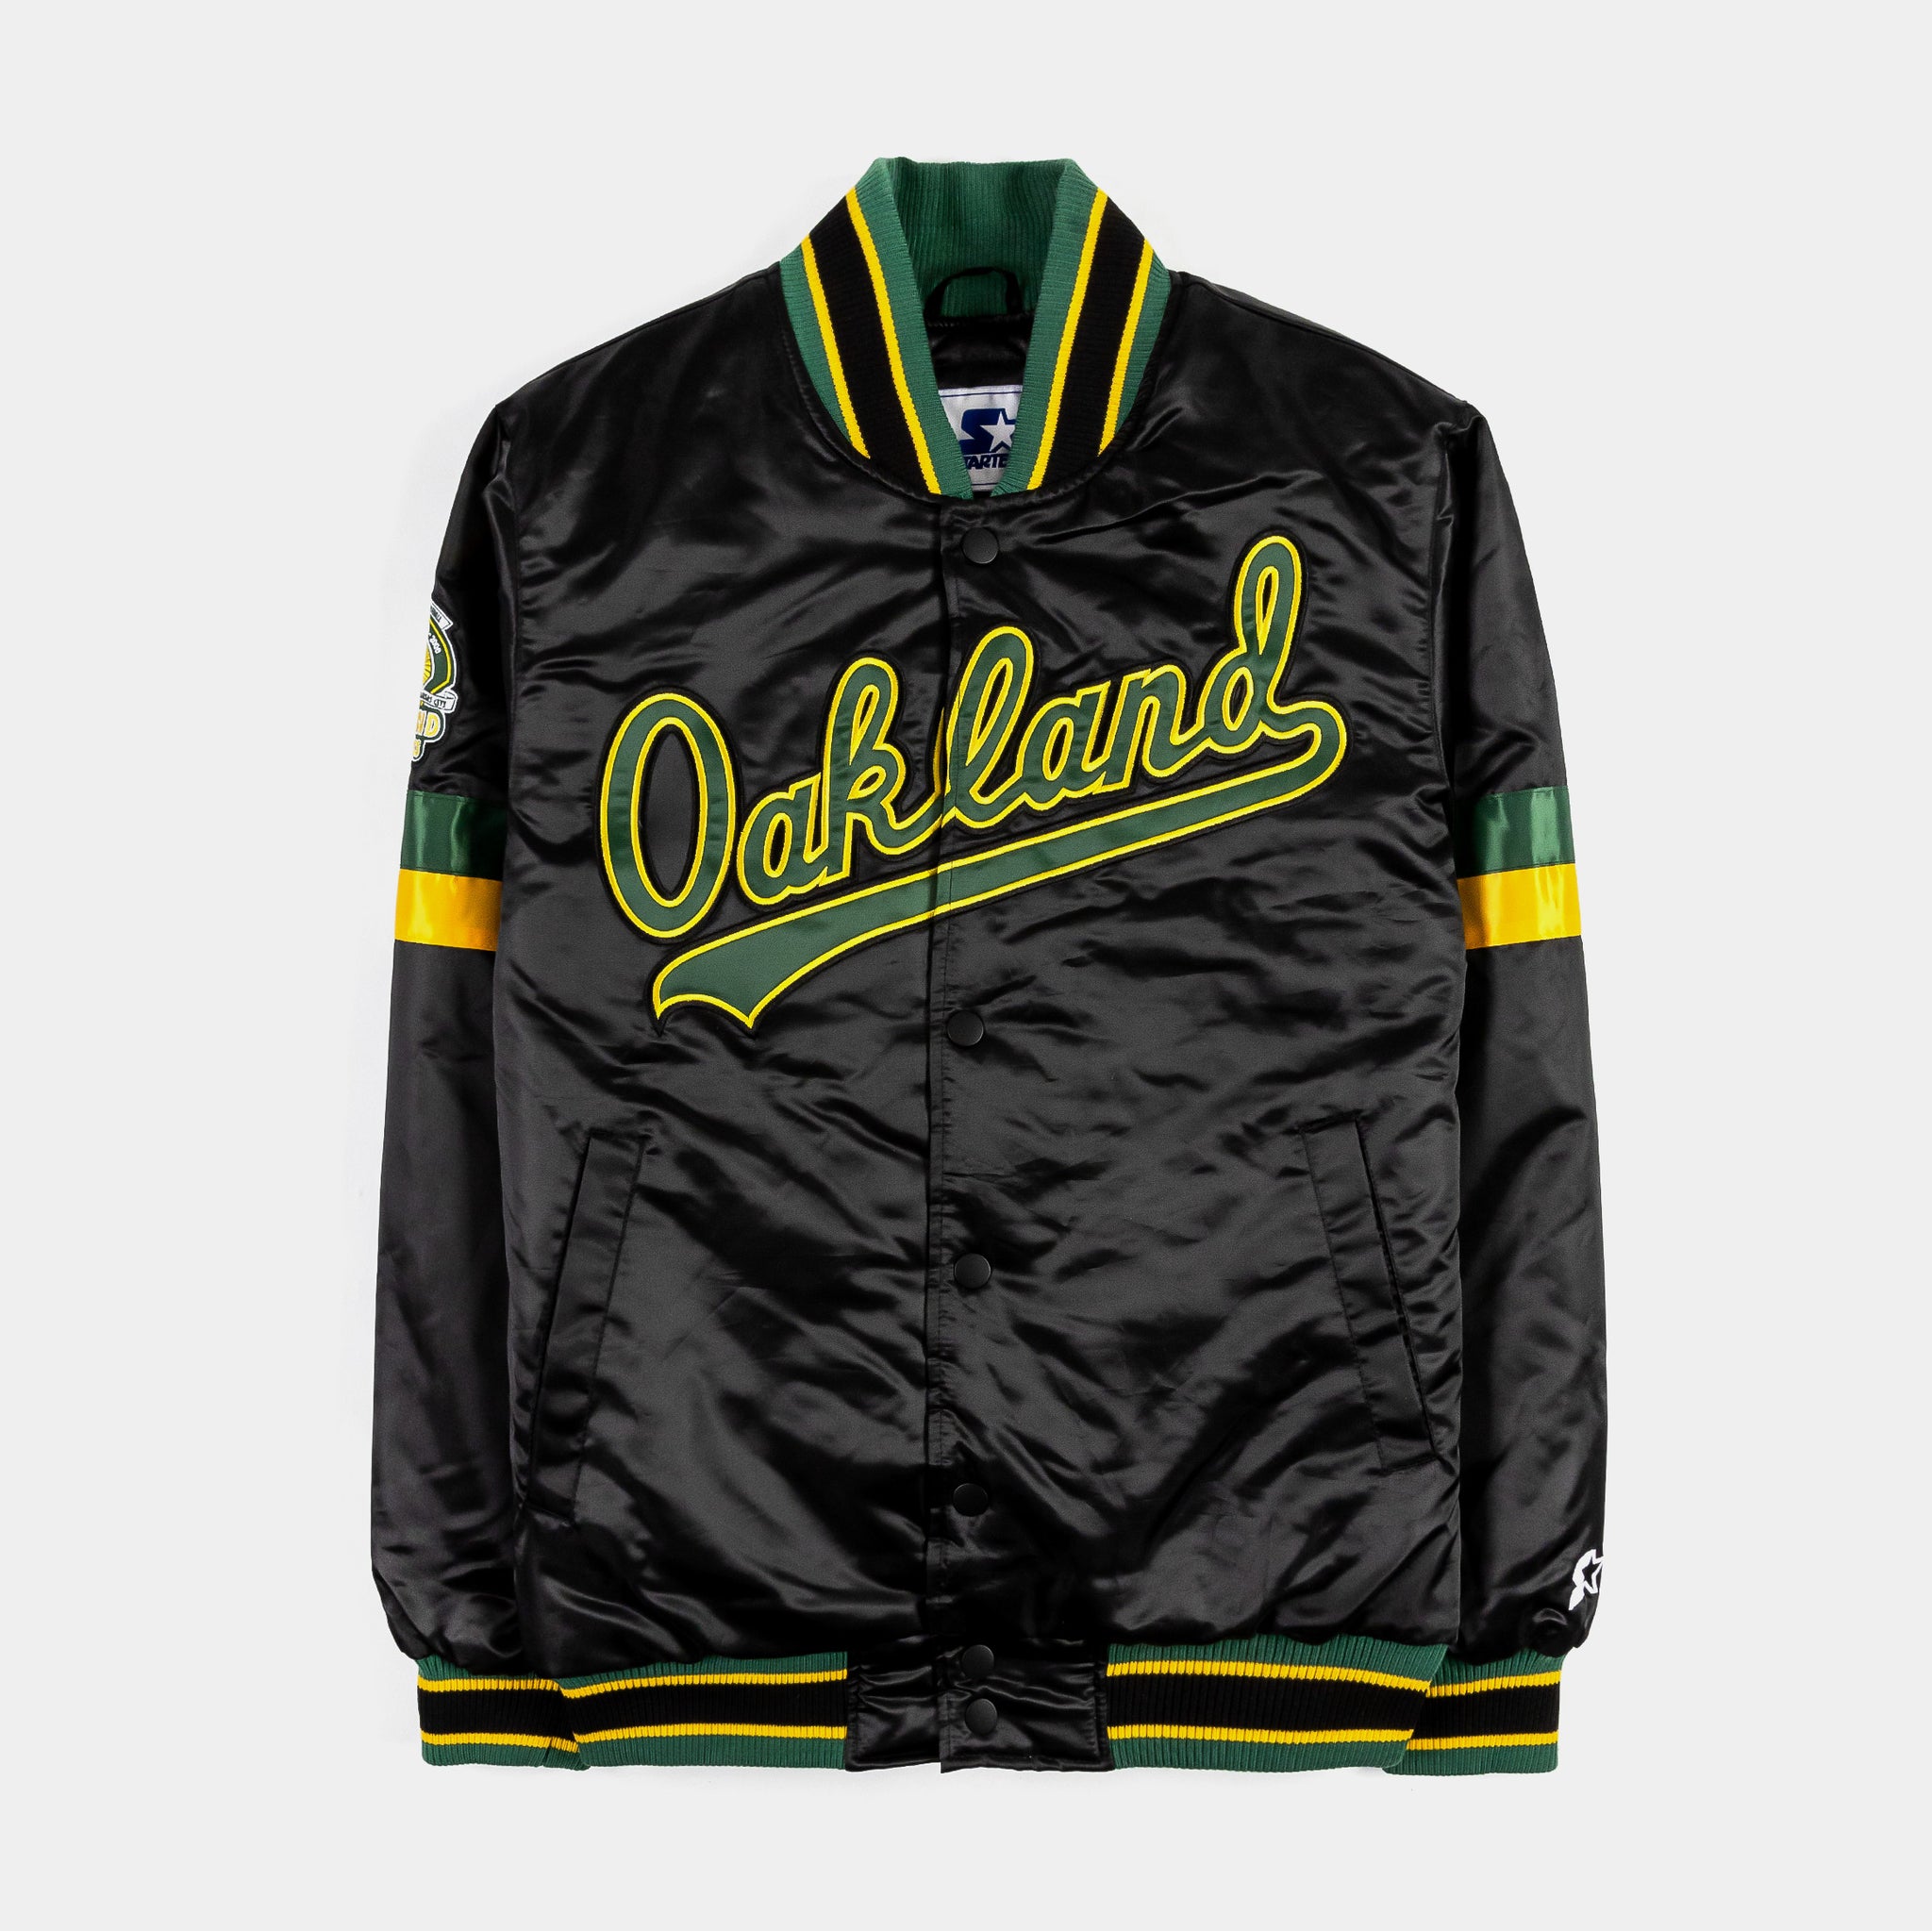 Men's Nike Green/ Oakland Athletics Game Authentic Collection